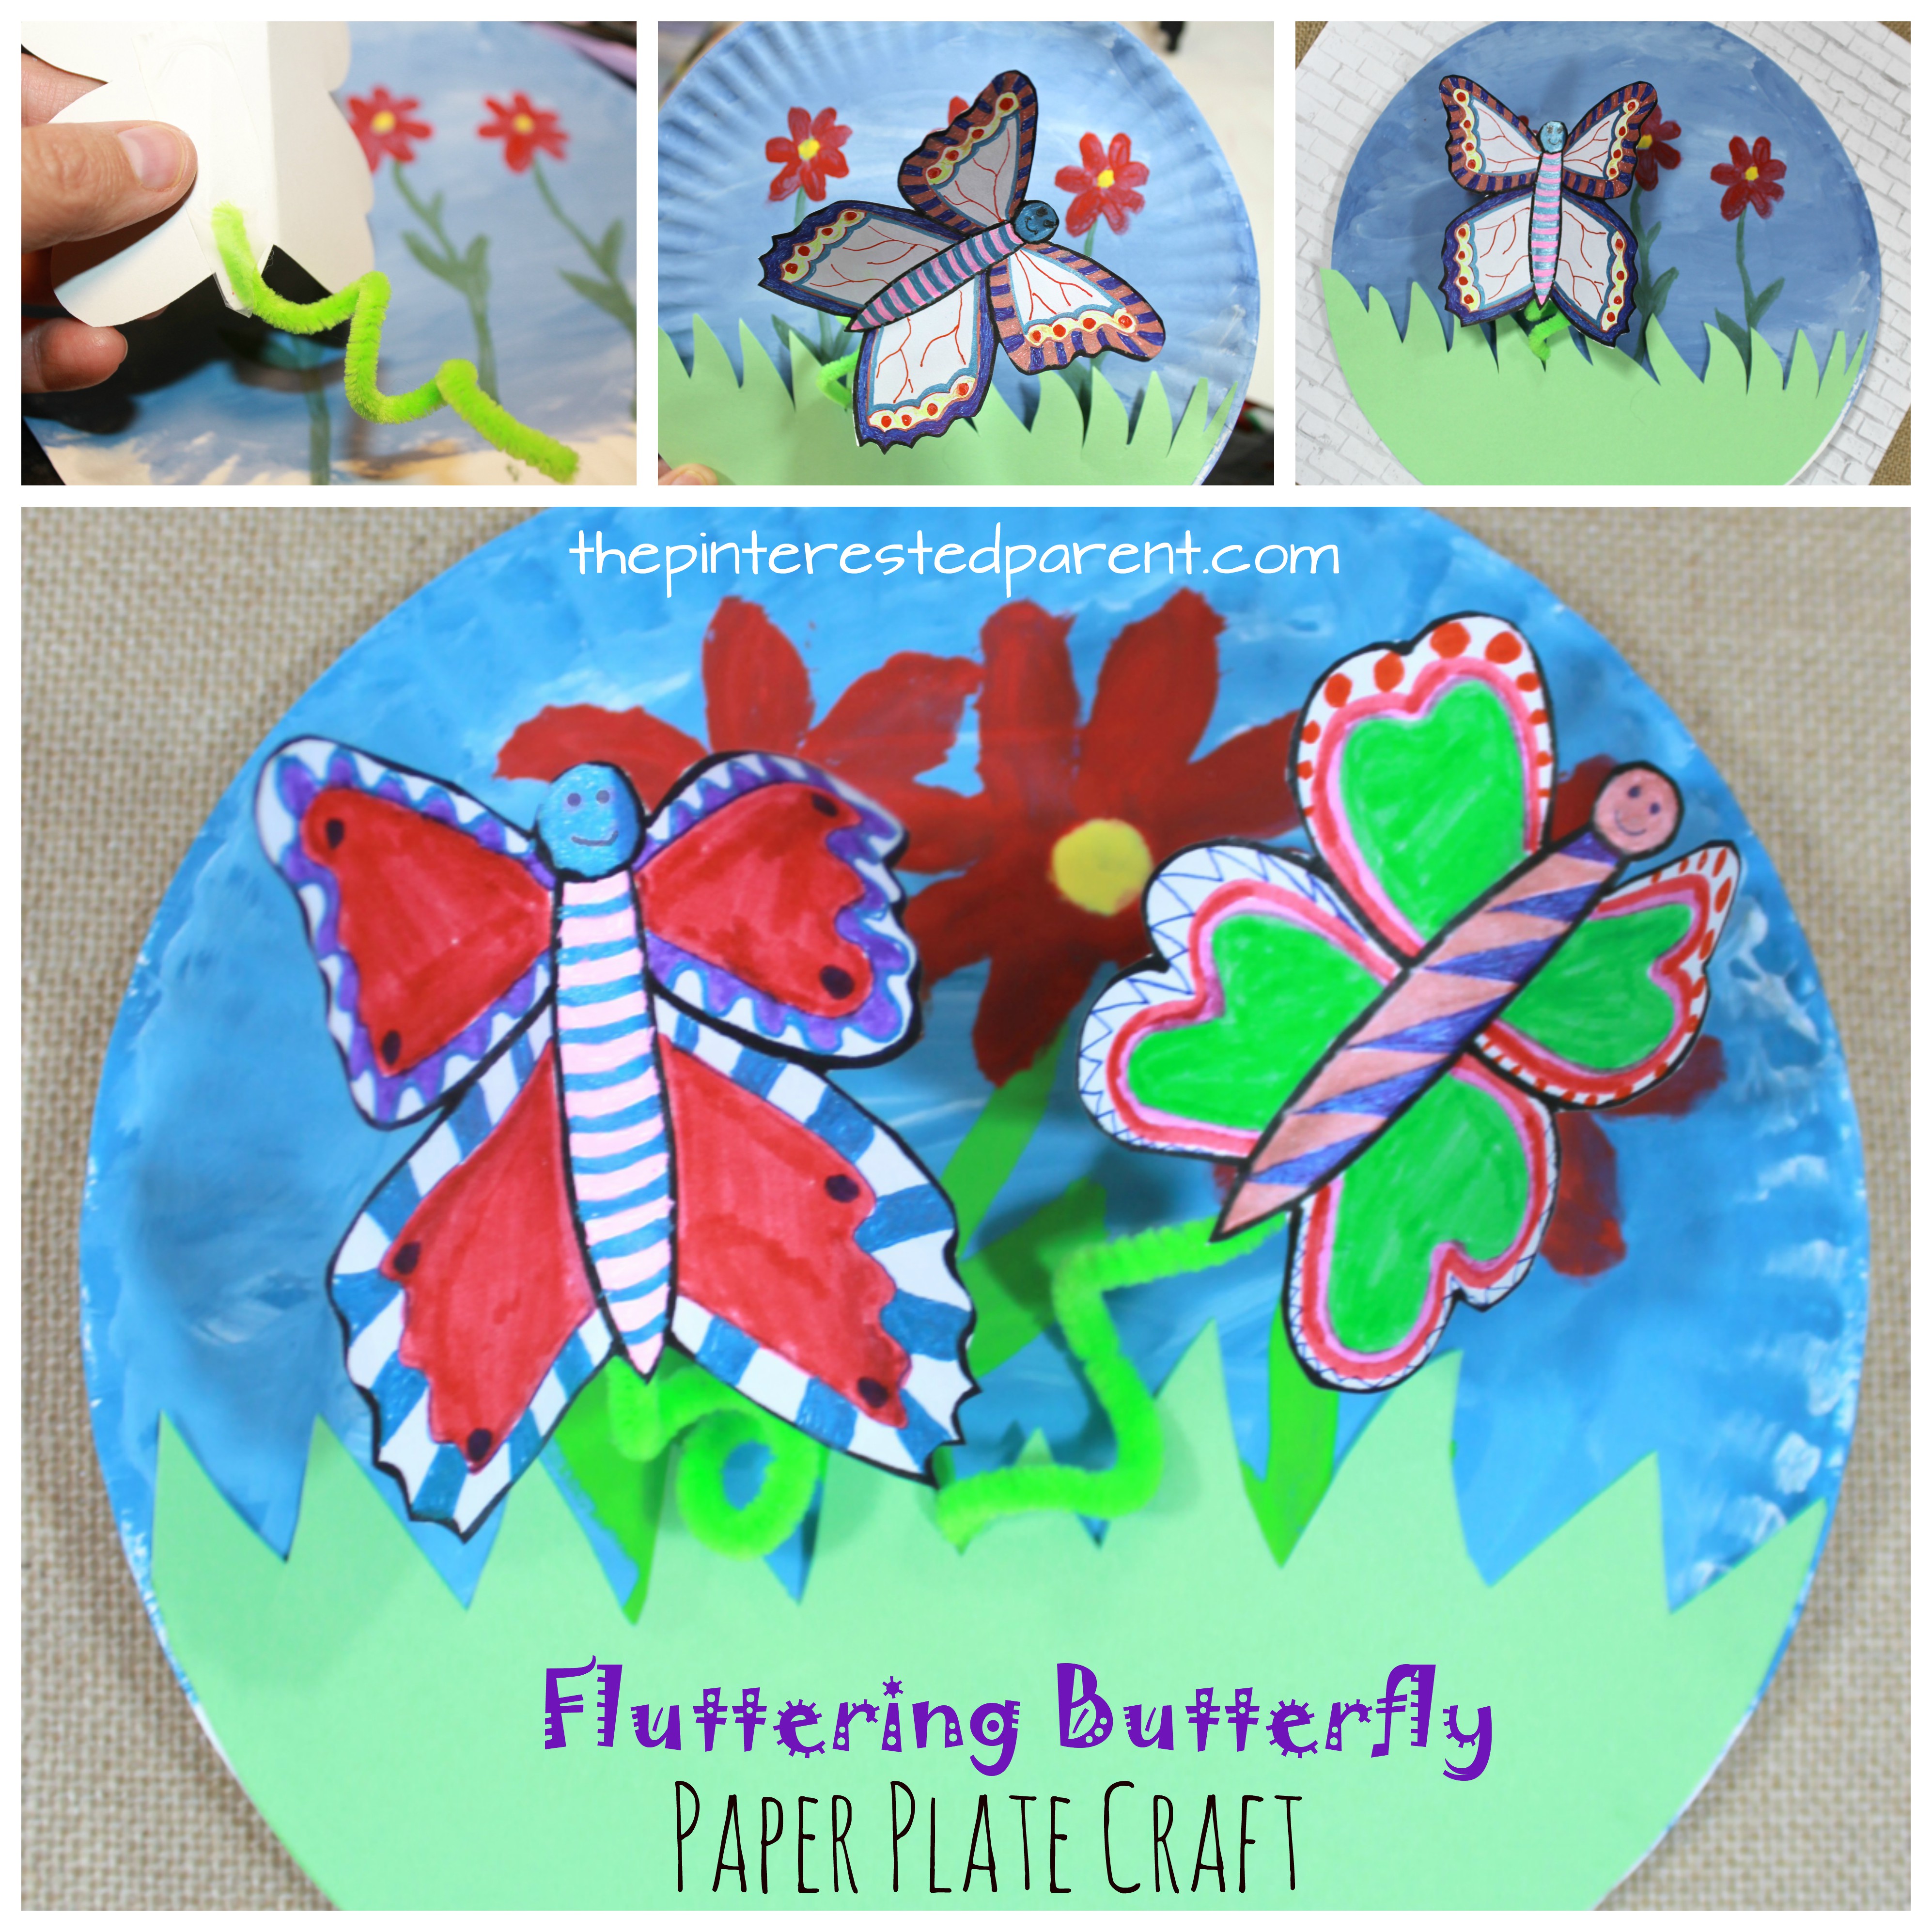 Preschool Crafts for Kids*: Easy Butterfly Straw and Paper Craft and song